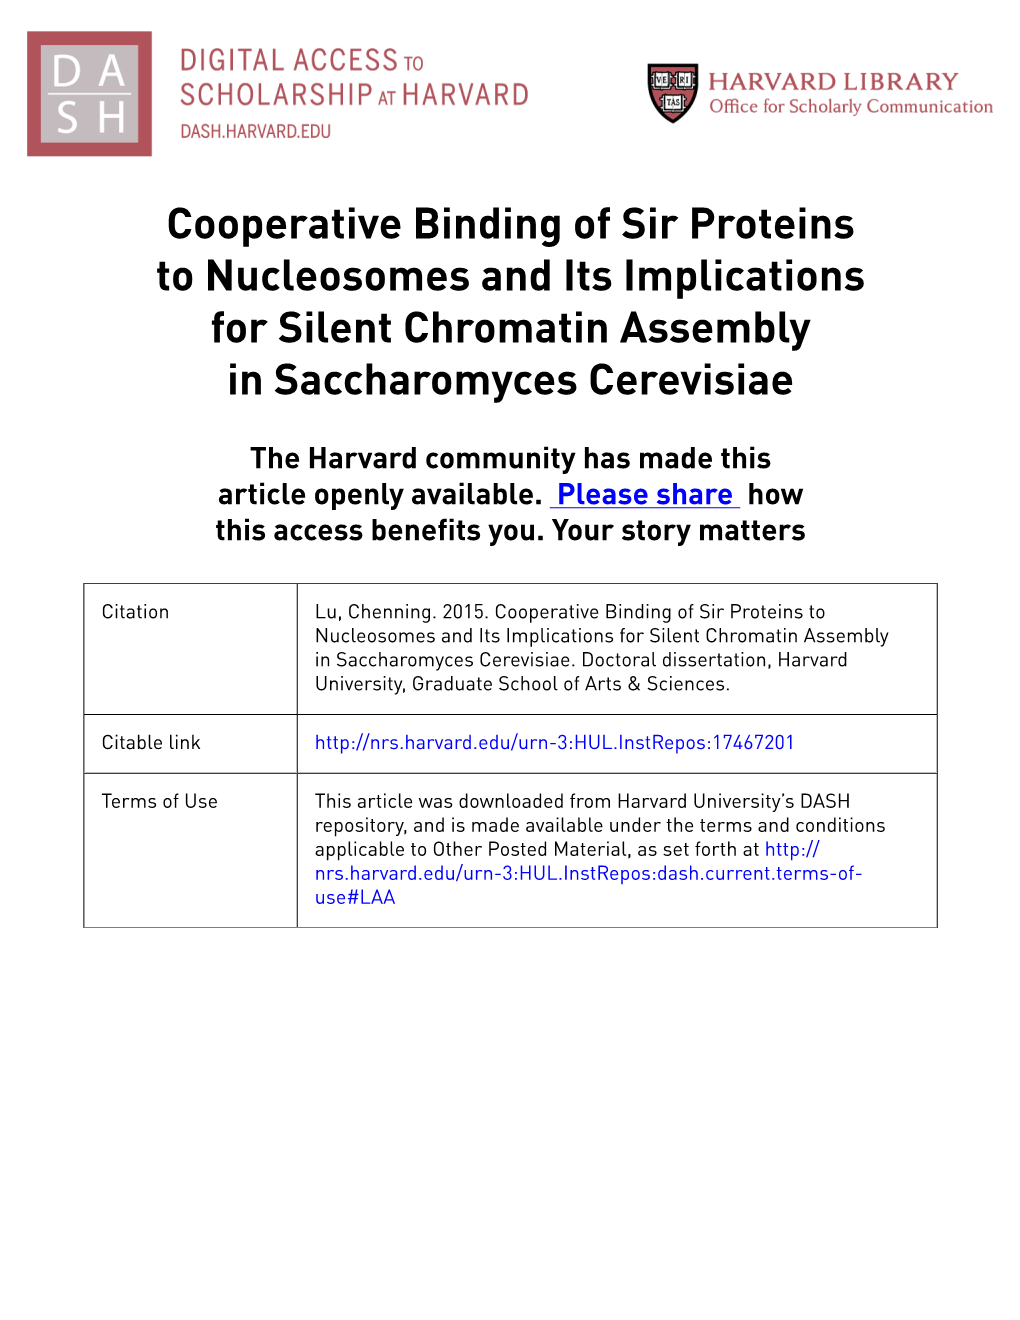 Cooperative Binding of Sir Proteins to Nucleosomes and Its Implications for Silent Chromatin Assembly in Saccharomyces Cerevisiae